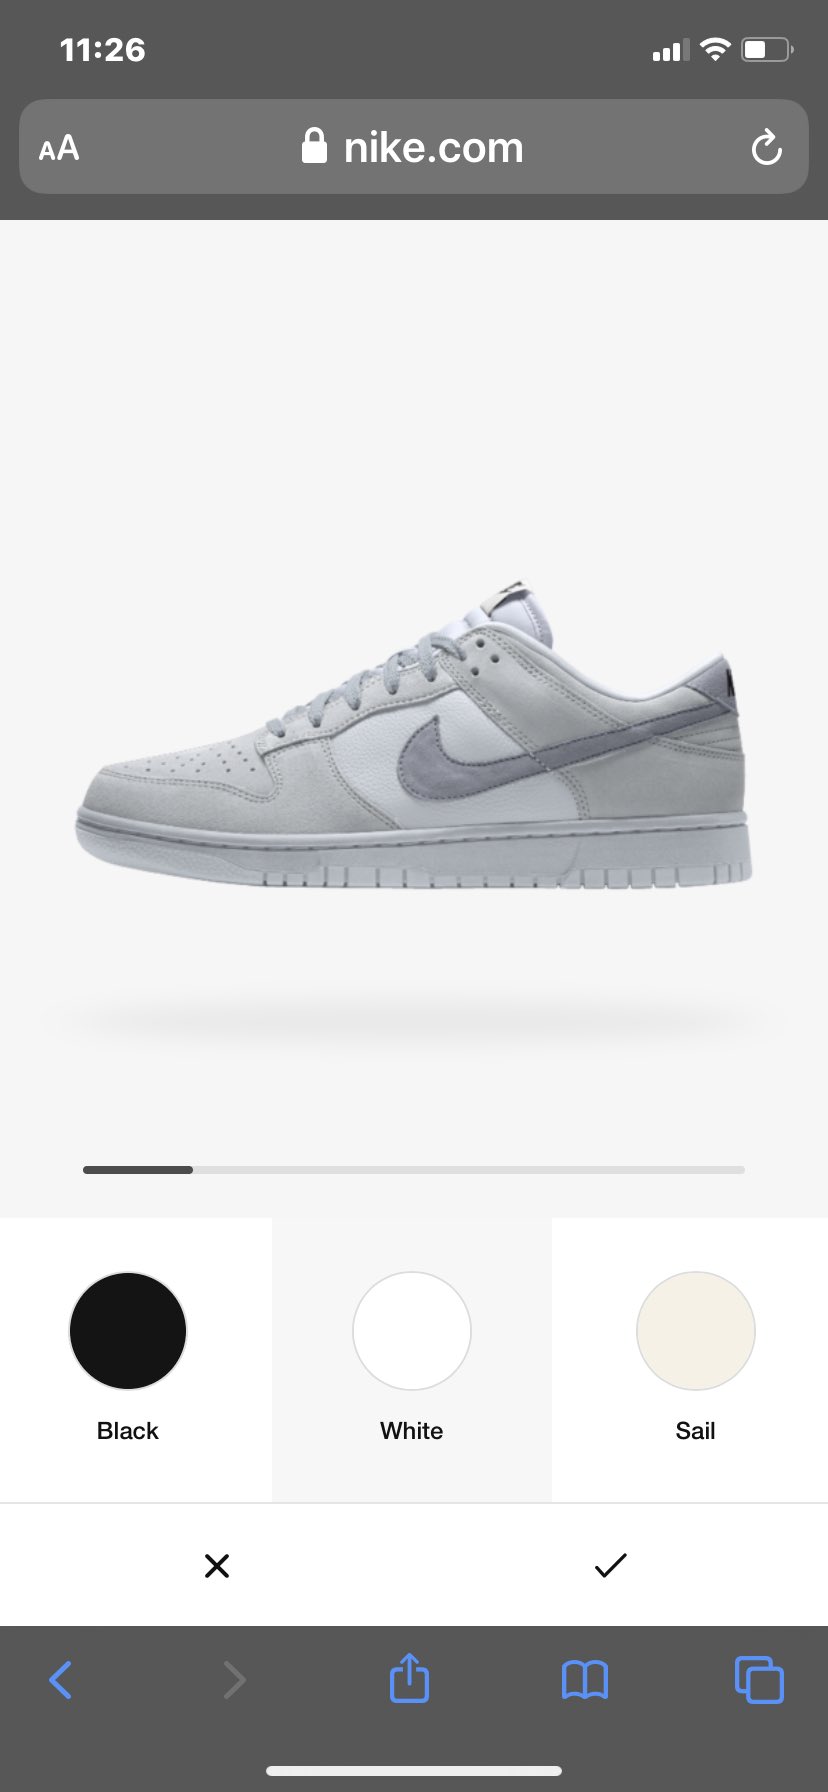 Nice Kicks The Nike Dunk Low 365 By You Are Ready To Customize Show Us Your Designs Before They Drop T Co 133emjv0zs Twitter